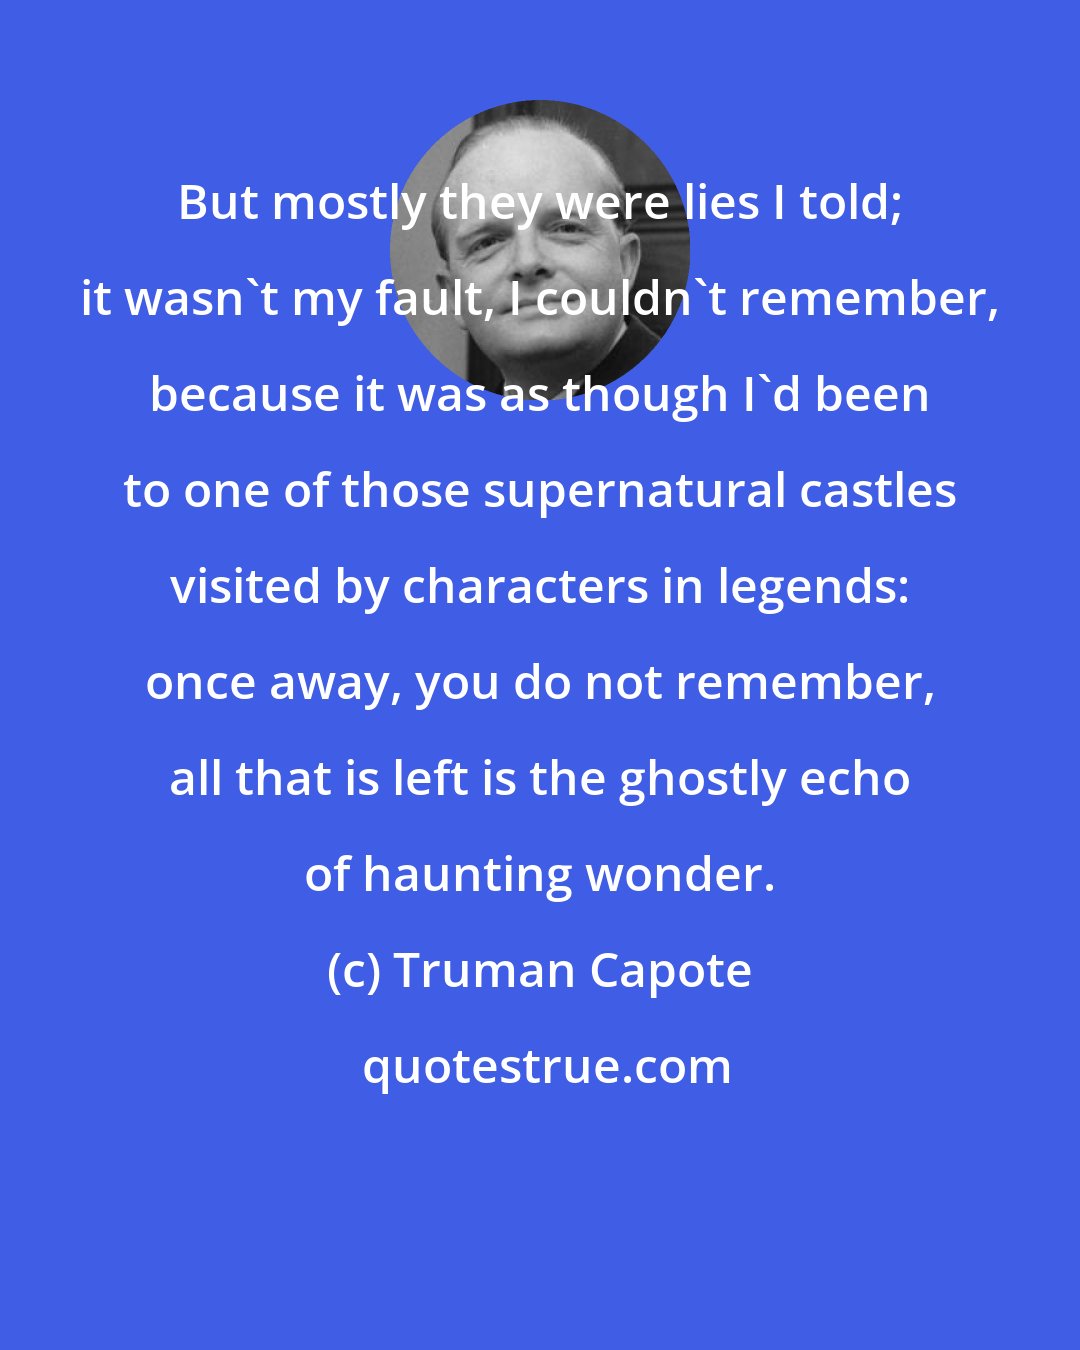 Truman Capote: But mostly they were lies I told; it wasn't my fault, I couldn't remember, because it was as though I'd been to one of those supernatural castles visited by characters in legends: once away, you do not remember, all that is left is the ghostly echo of haunting wonder.